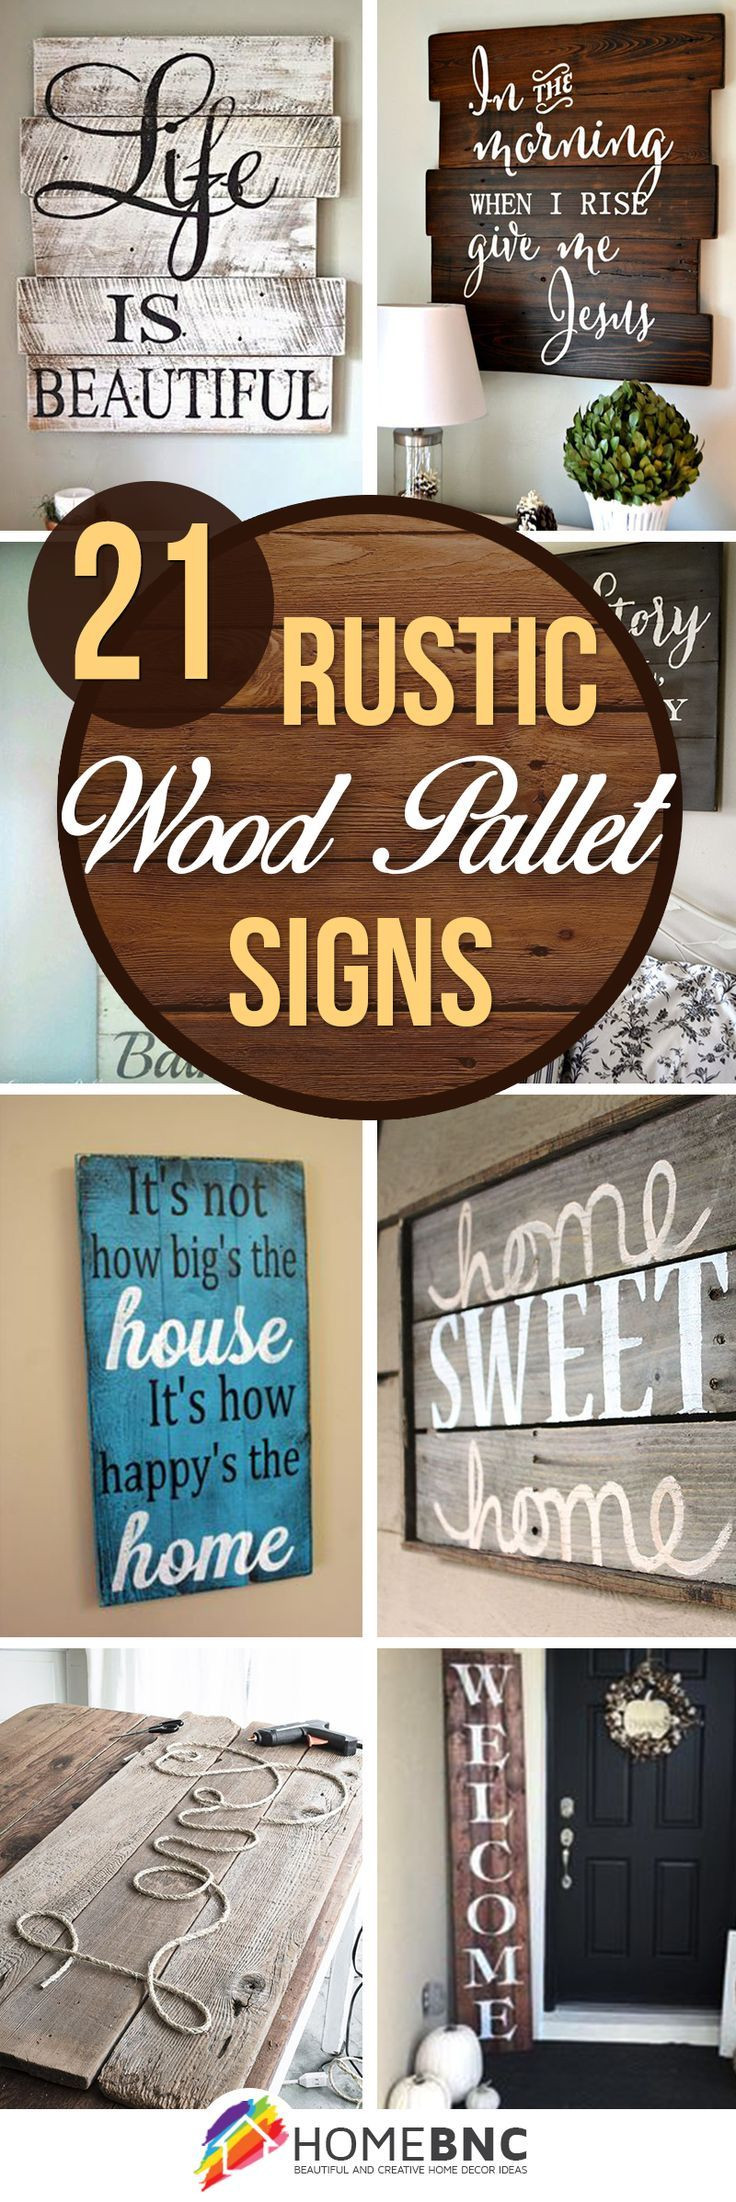 DIY Wooden Sign
 Best 20 DIY and crafts ideas on Pinterest